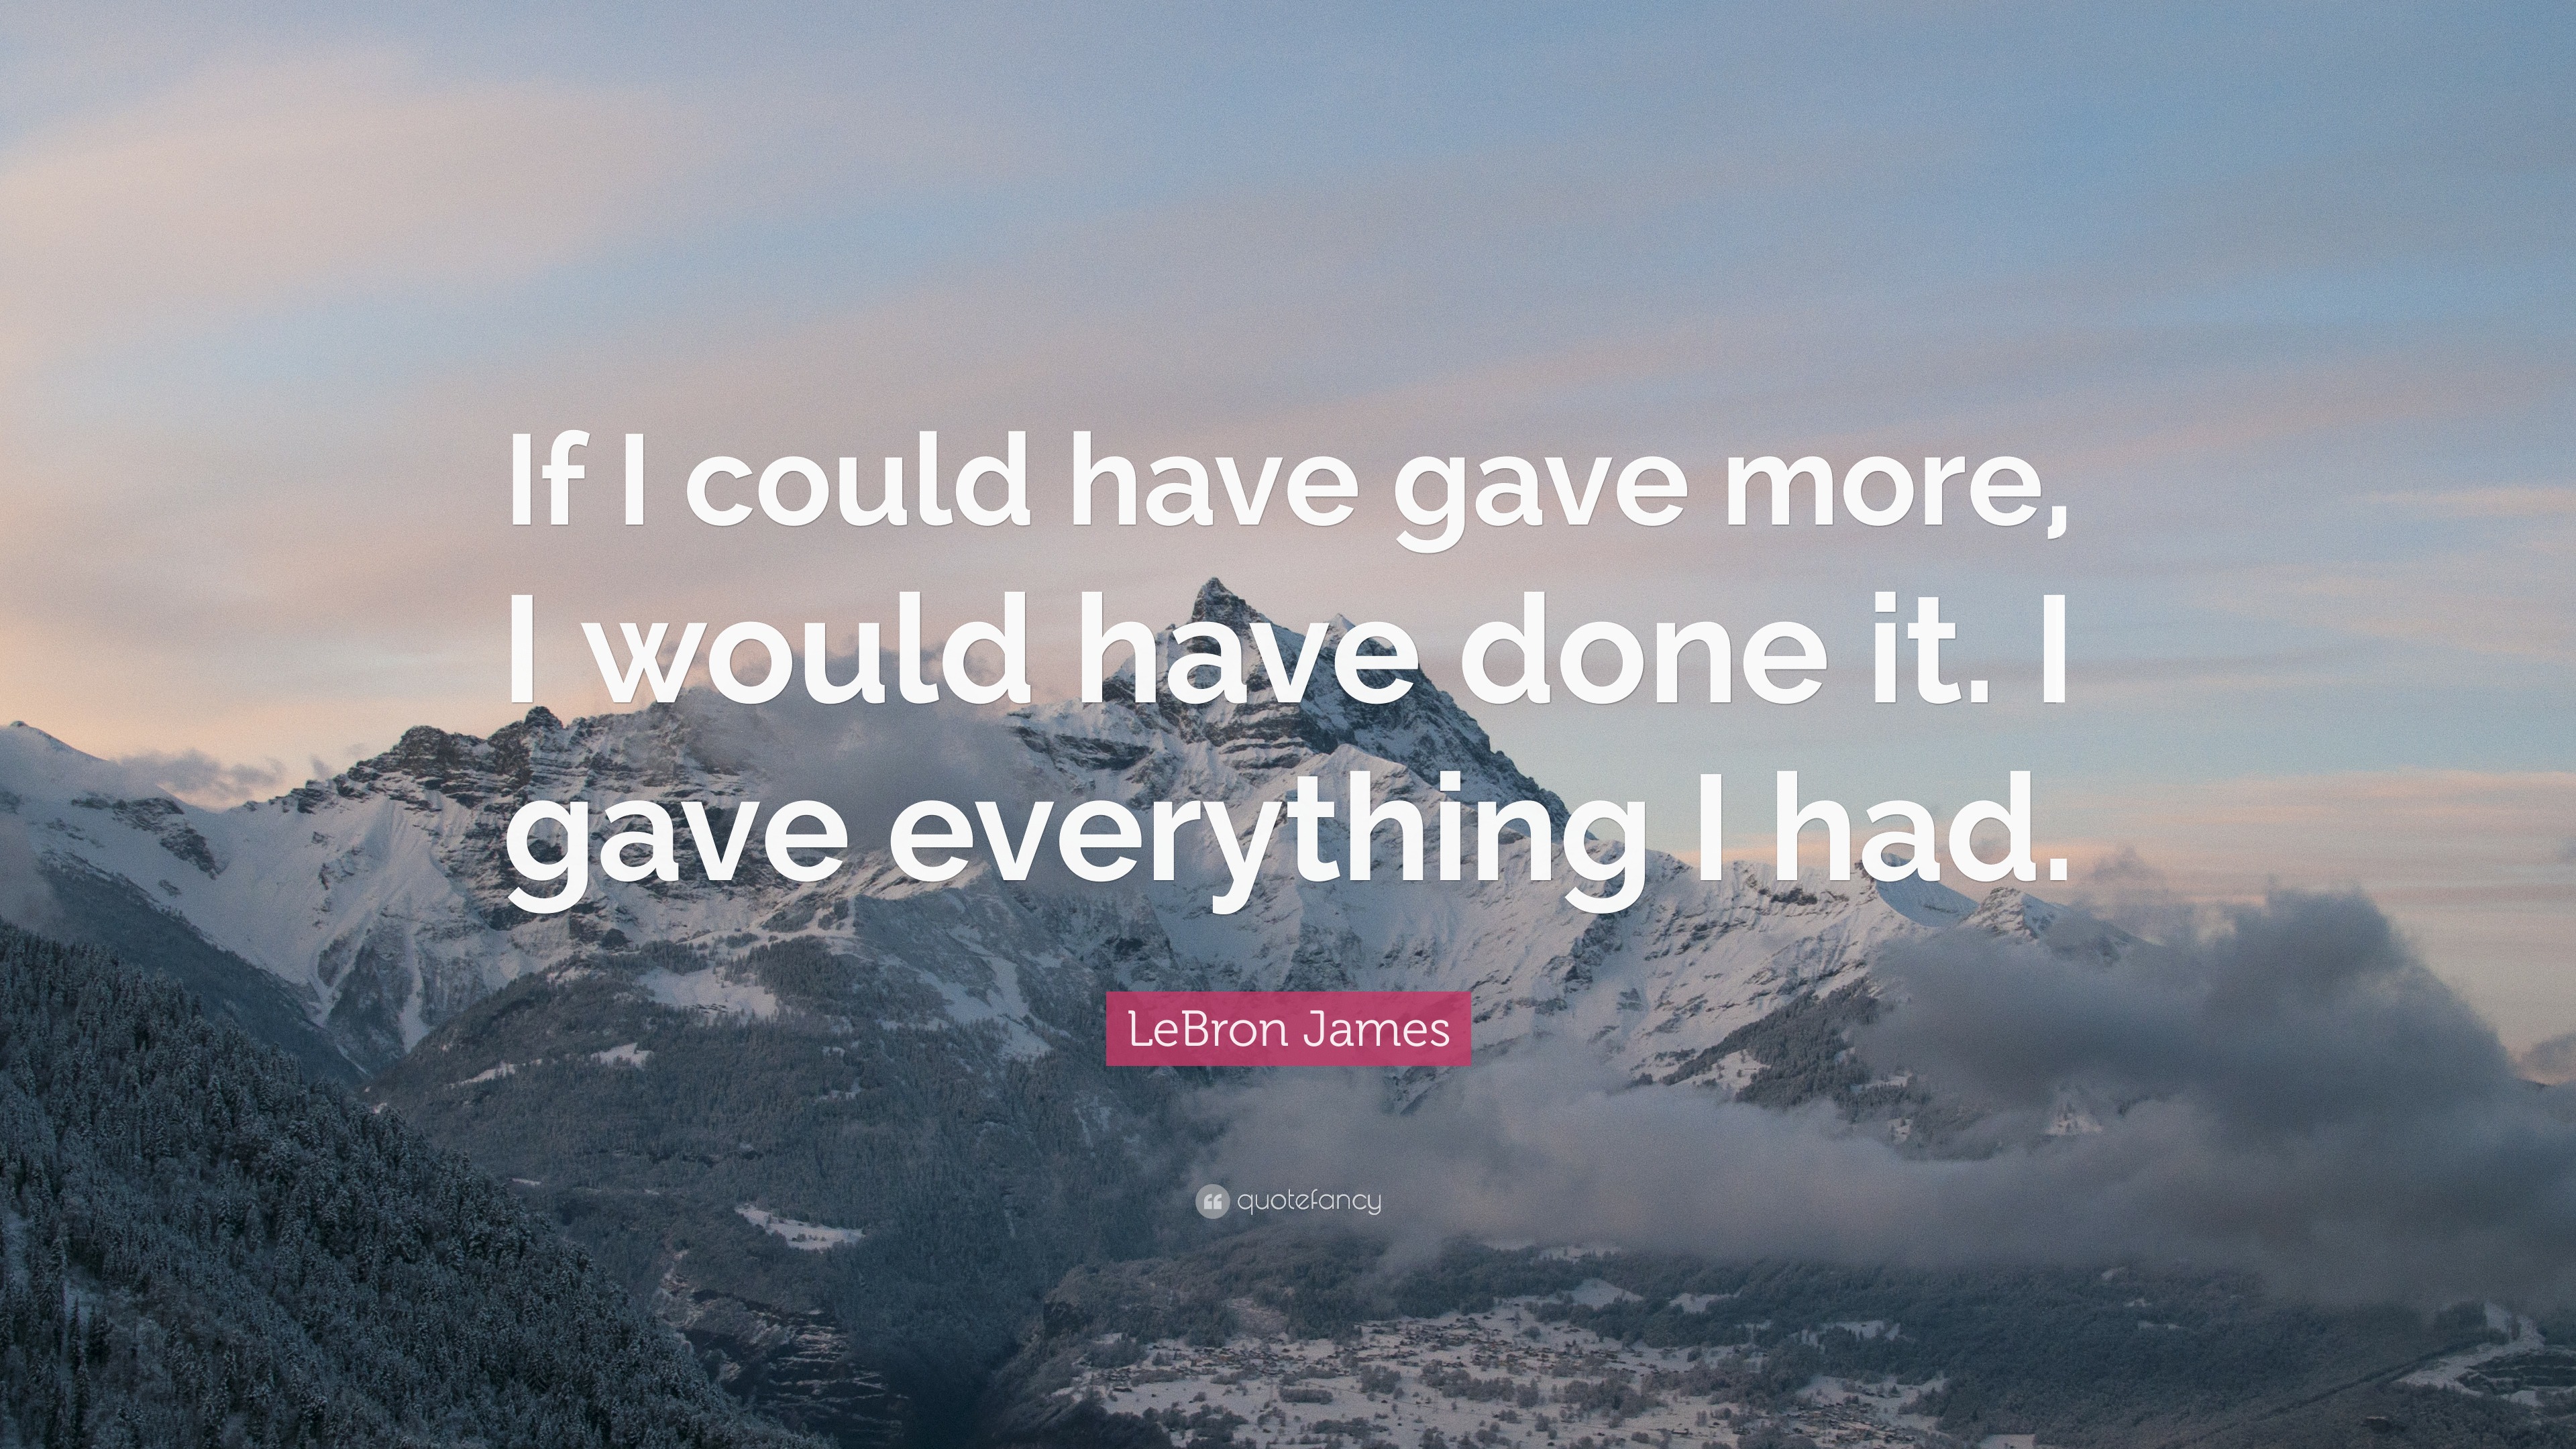 LeBron James Quote: “If I could have gave more, I would have done it. I ...